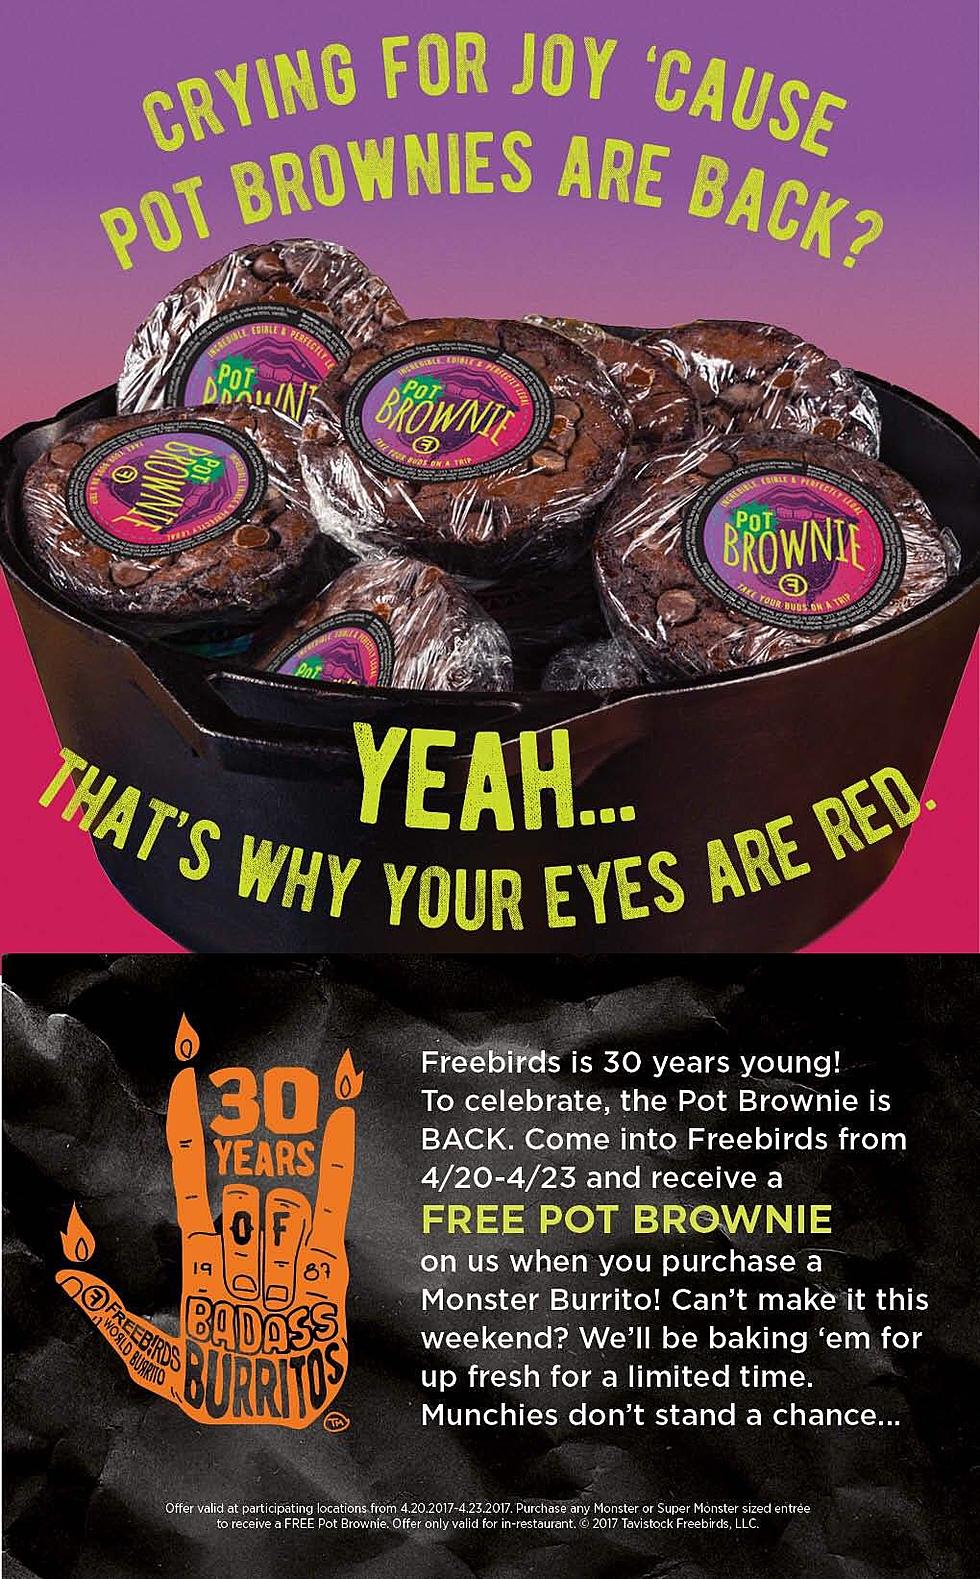 Today is the last day you can get a Pot Brownie at Free Birds….Yes you read that right.